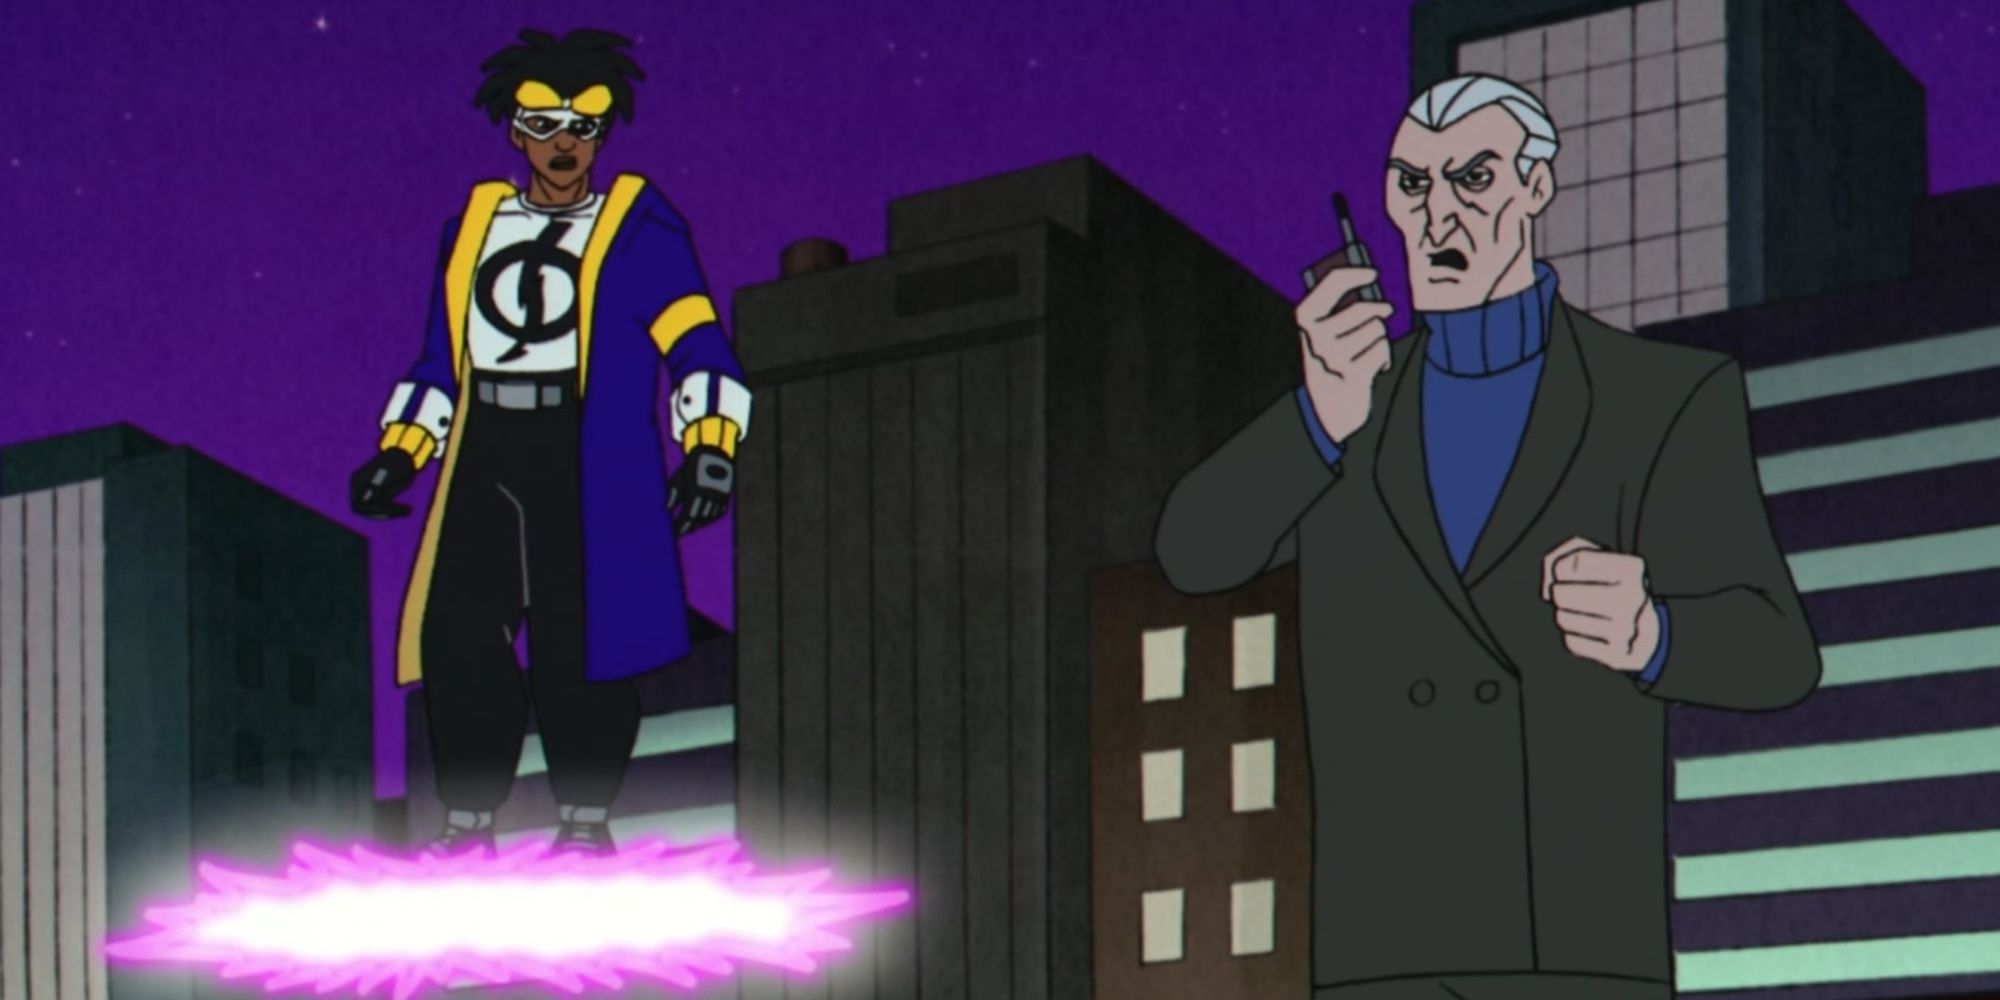 Virgil and Alva from Static Shock